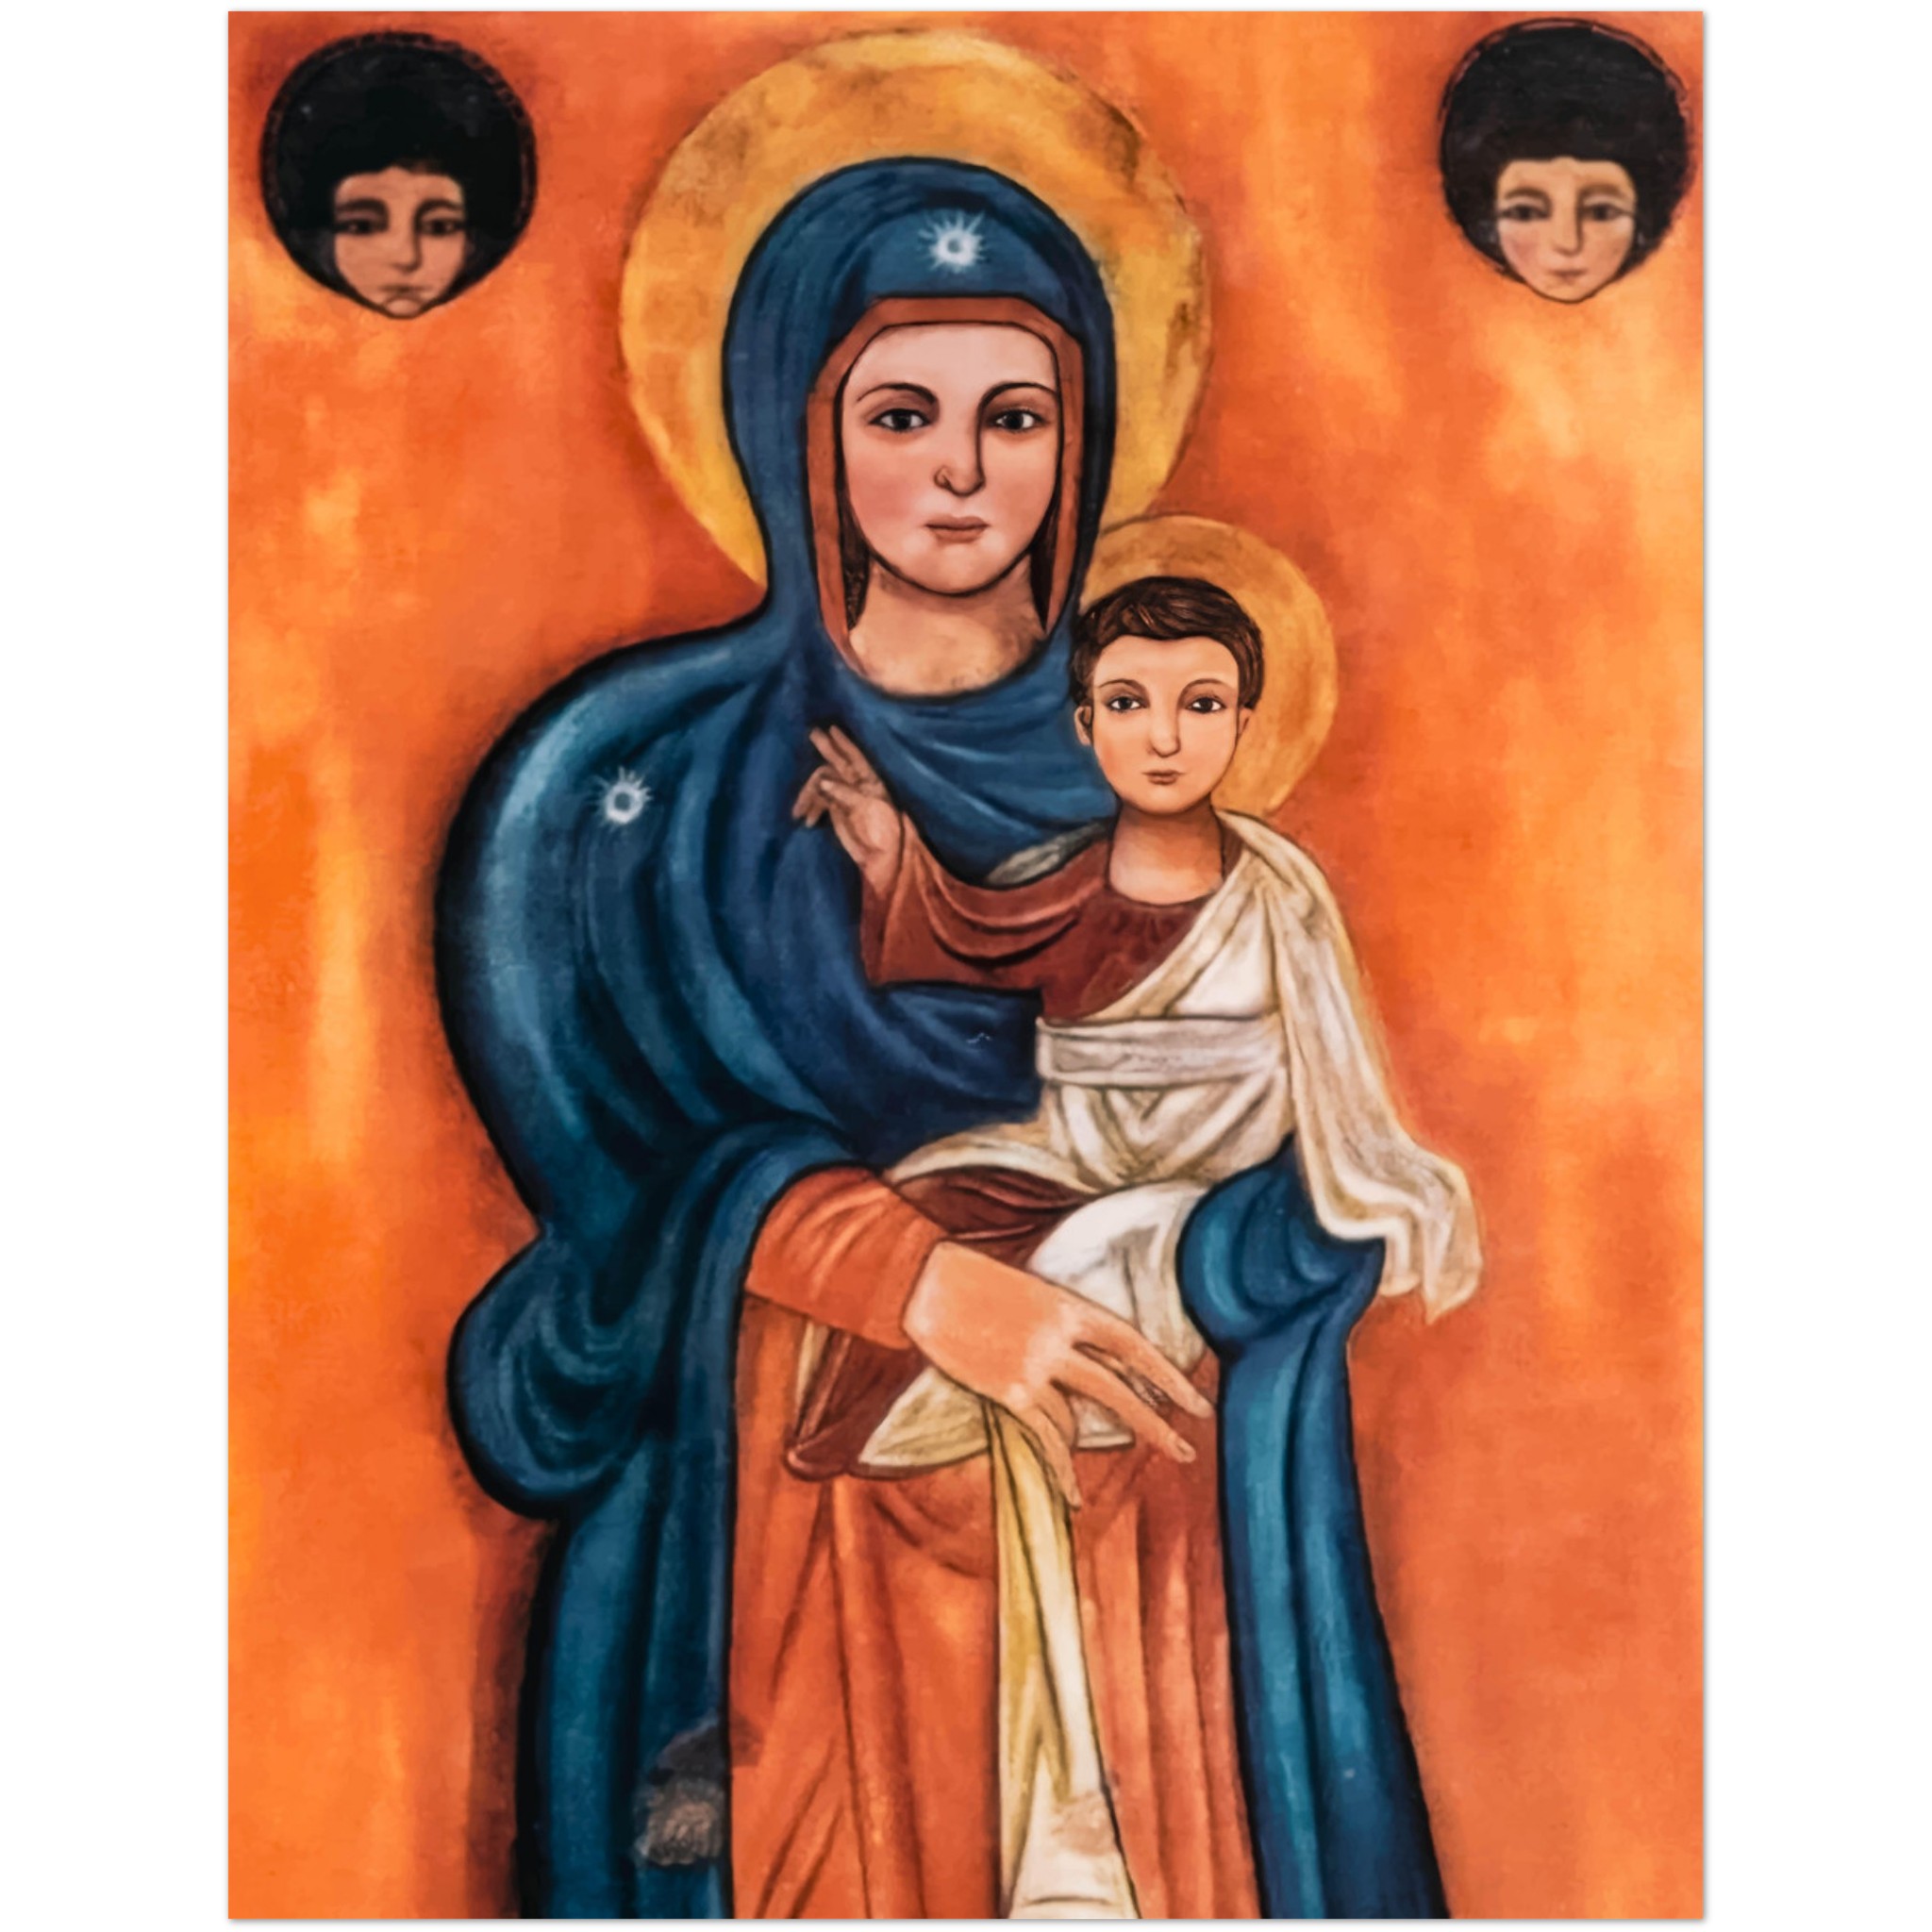 Our Lady of the Maronites, Elige Silk Paper Print 10 copies